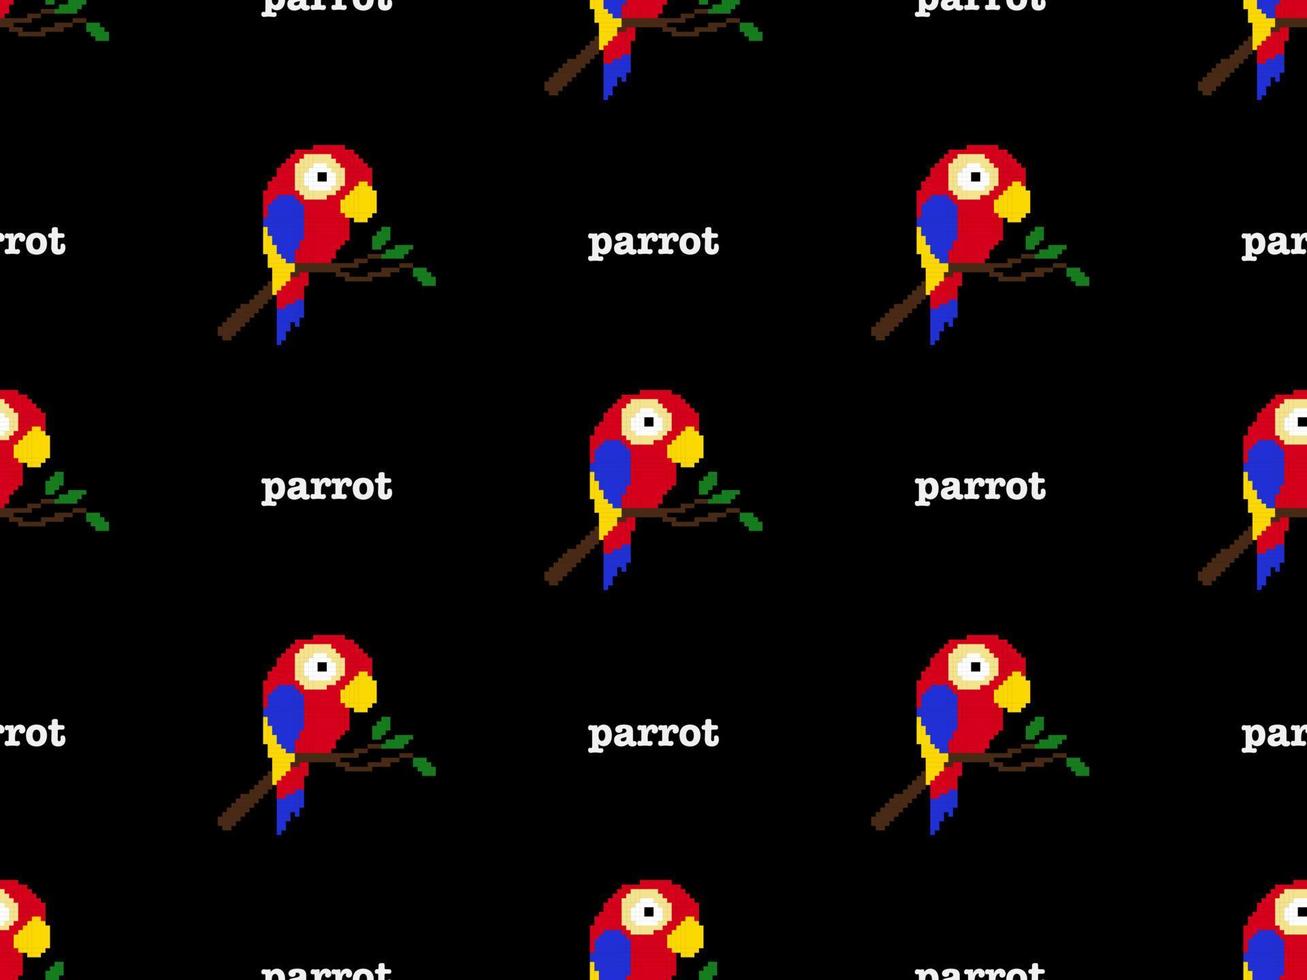 Parrot cartoon character seamless pattern on black background. Pixel style vector